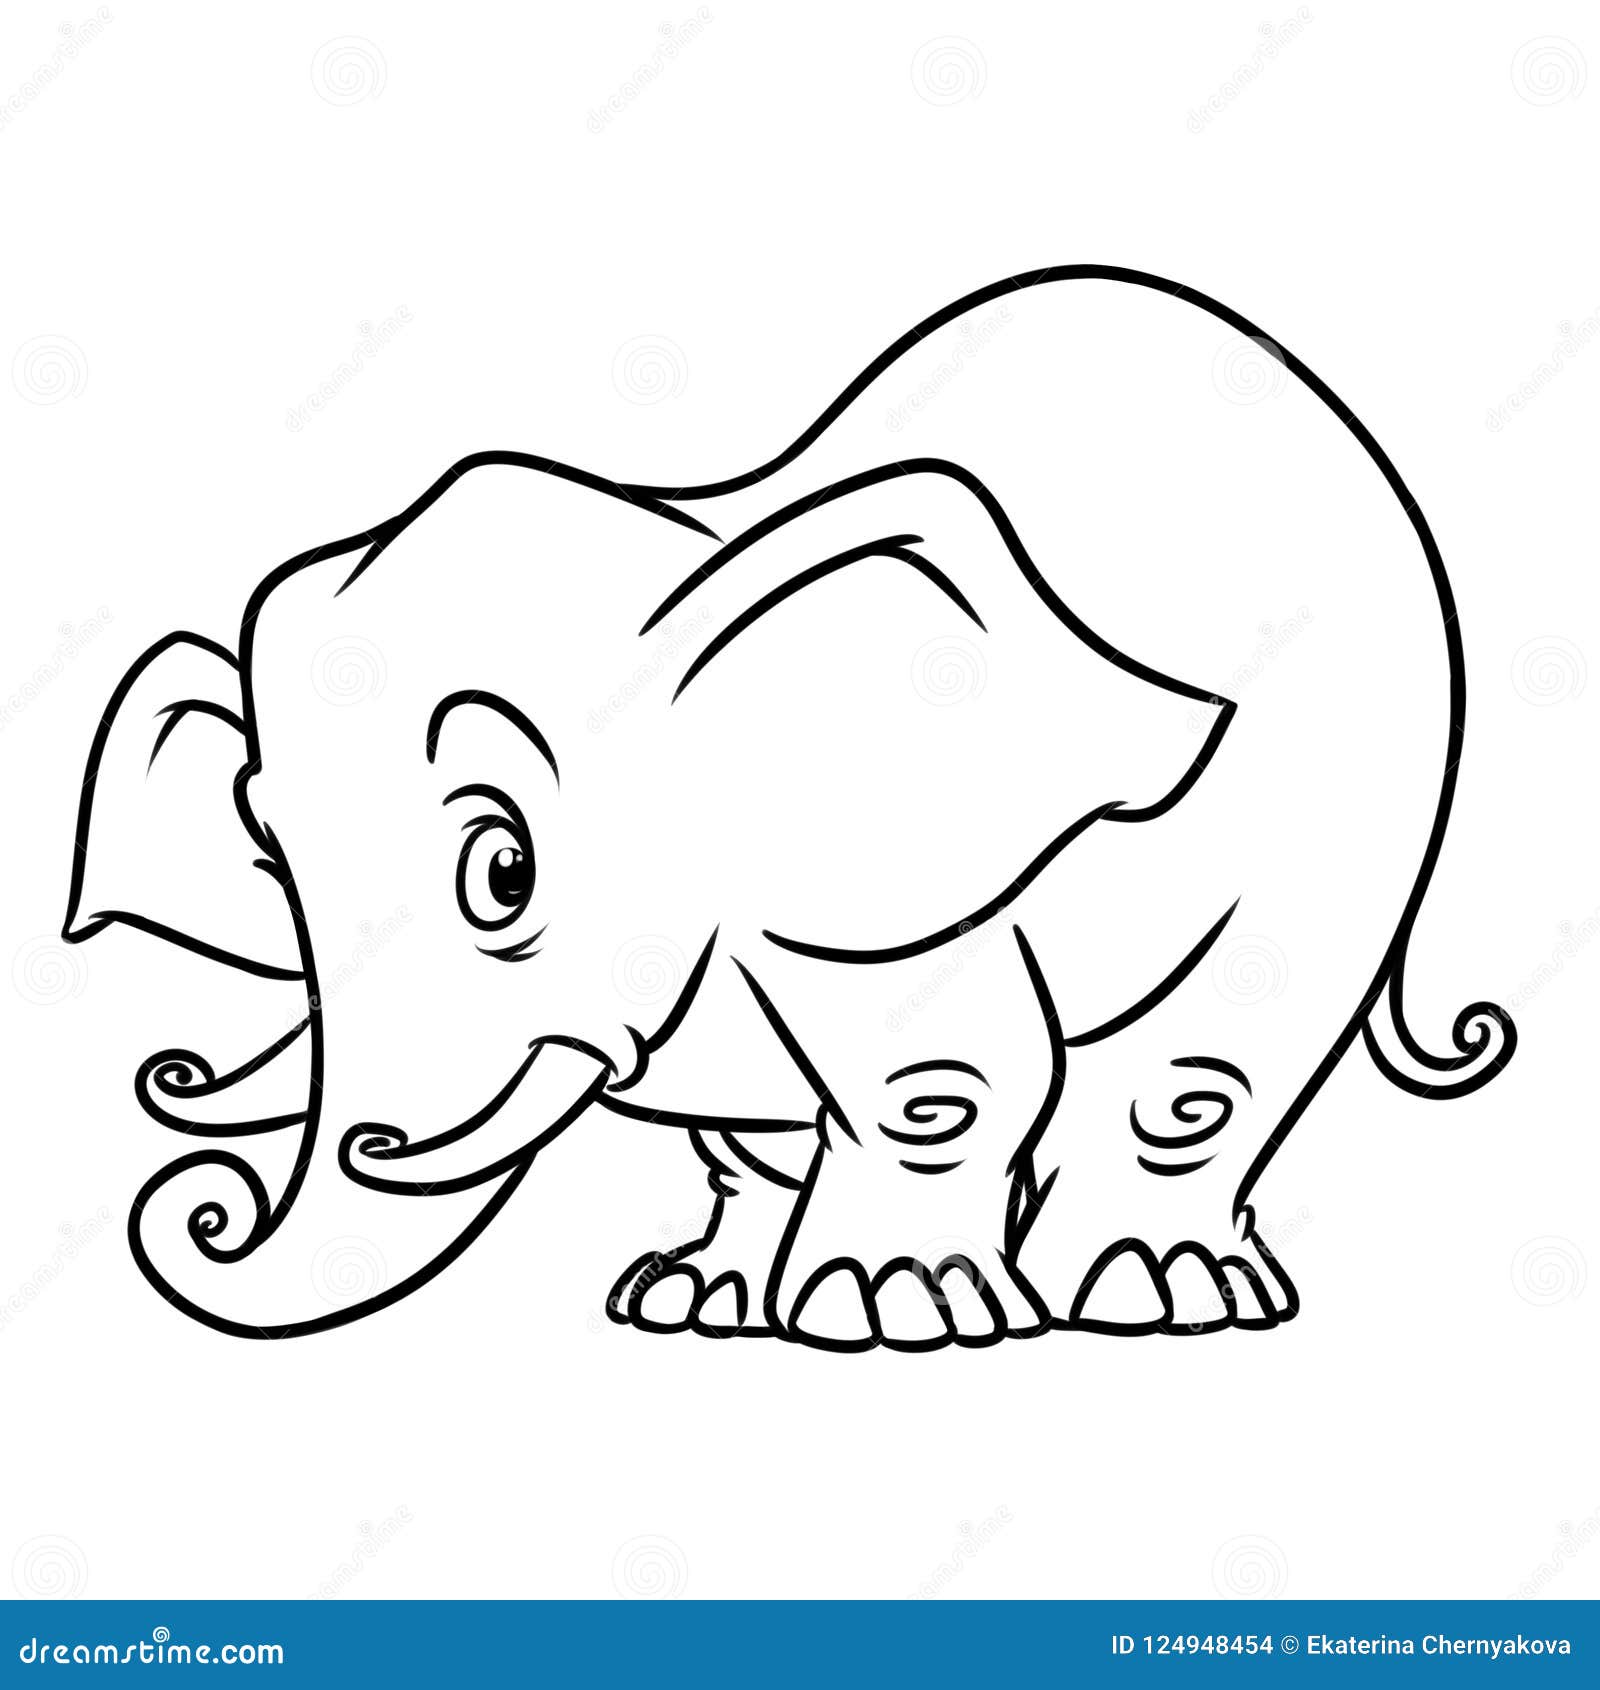 Elephant Animal Character Cartoon Coloring Page Stock Illustration ...